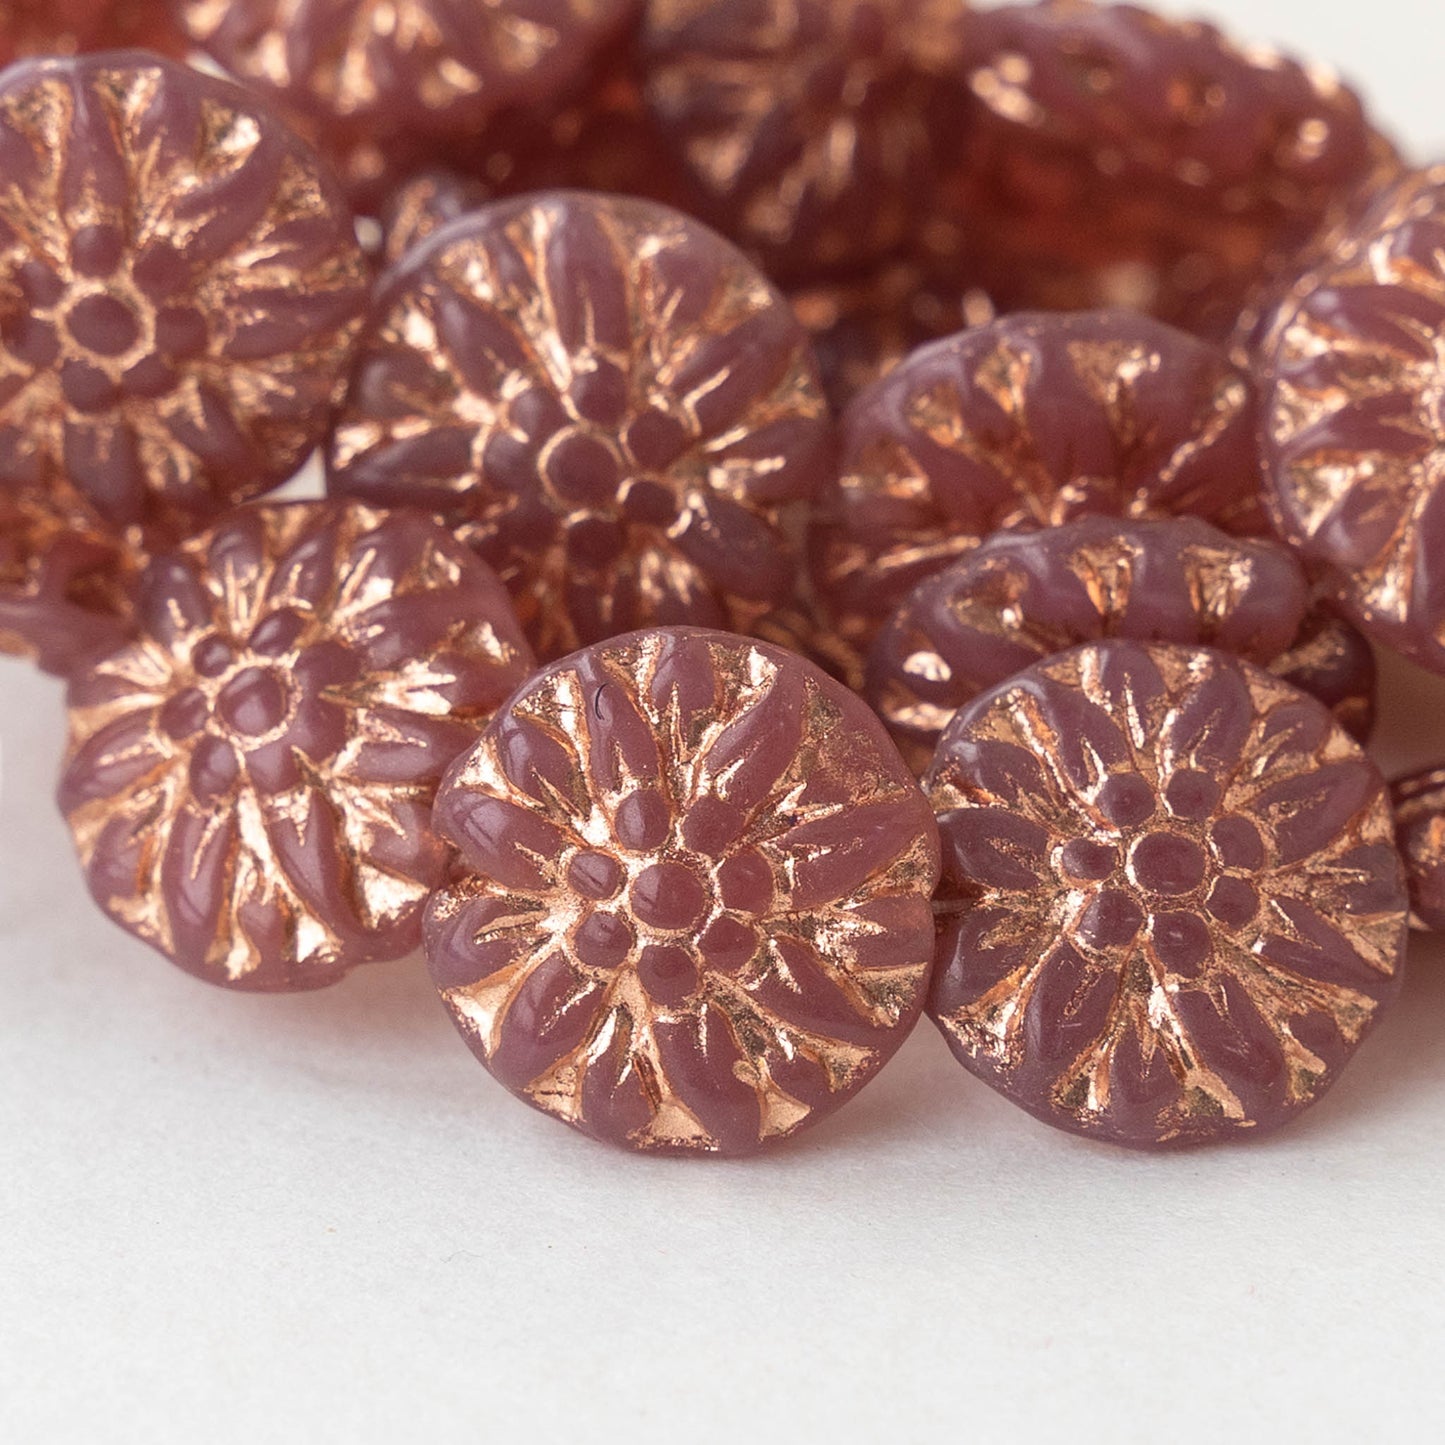 Load image into Gallery viewer, 14mm Dahlia Flower Beads - Dusty Rose with Copper Wash - 10 Beads
